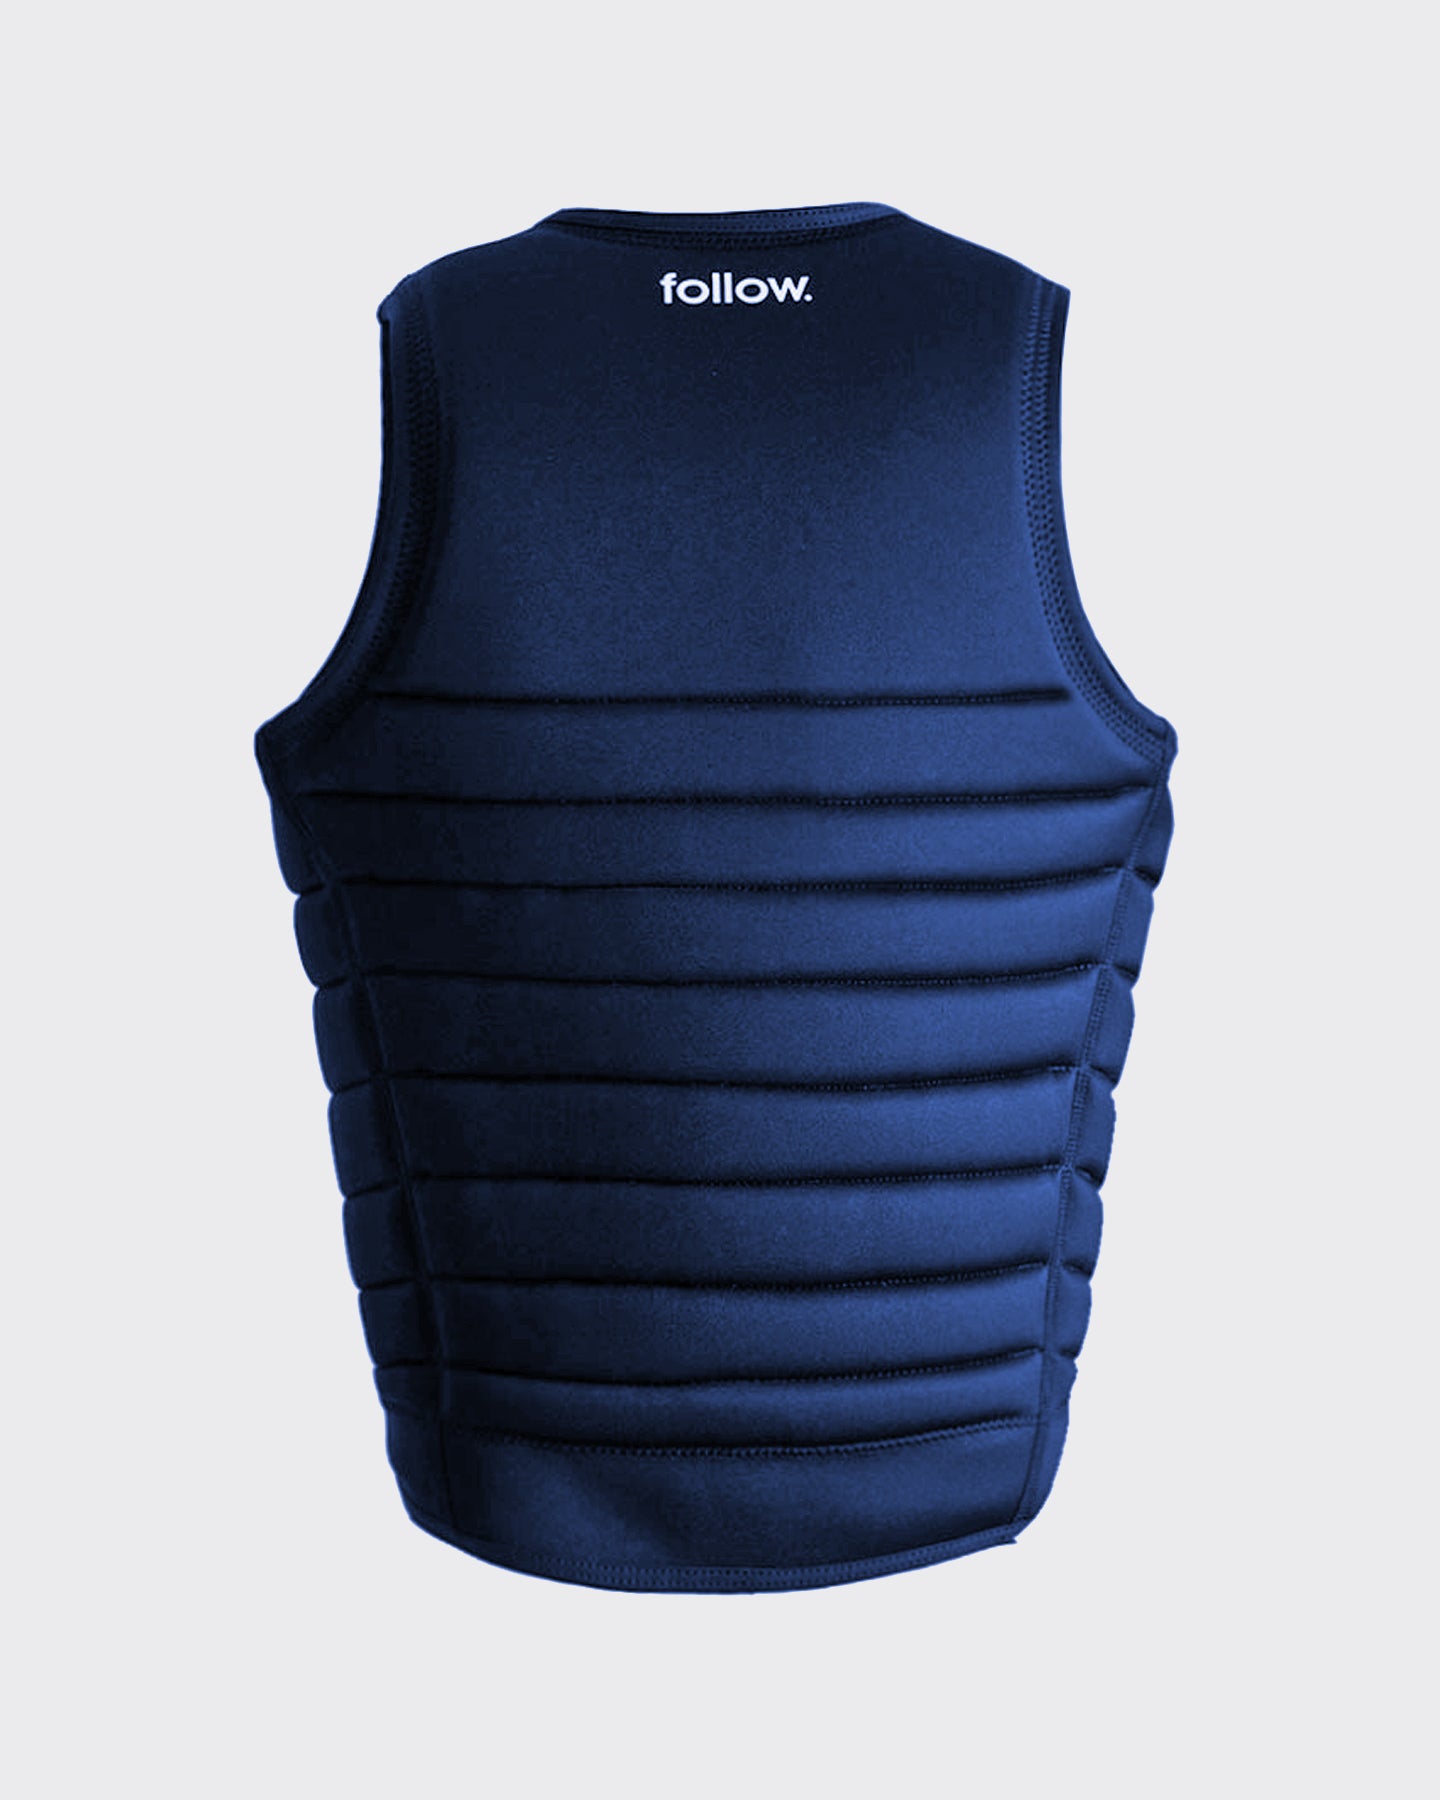 Follow Primary Impact- Navy - Back